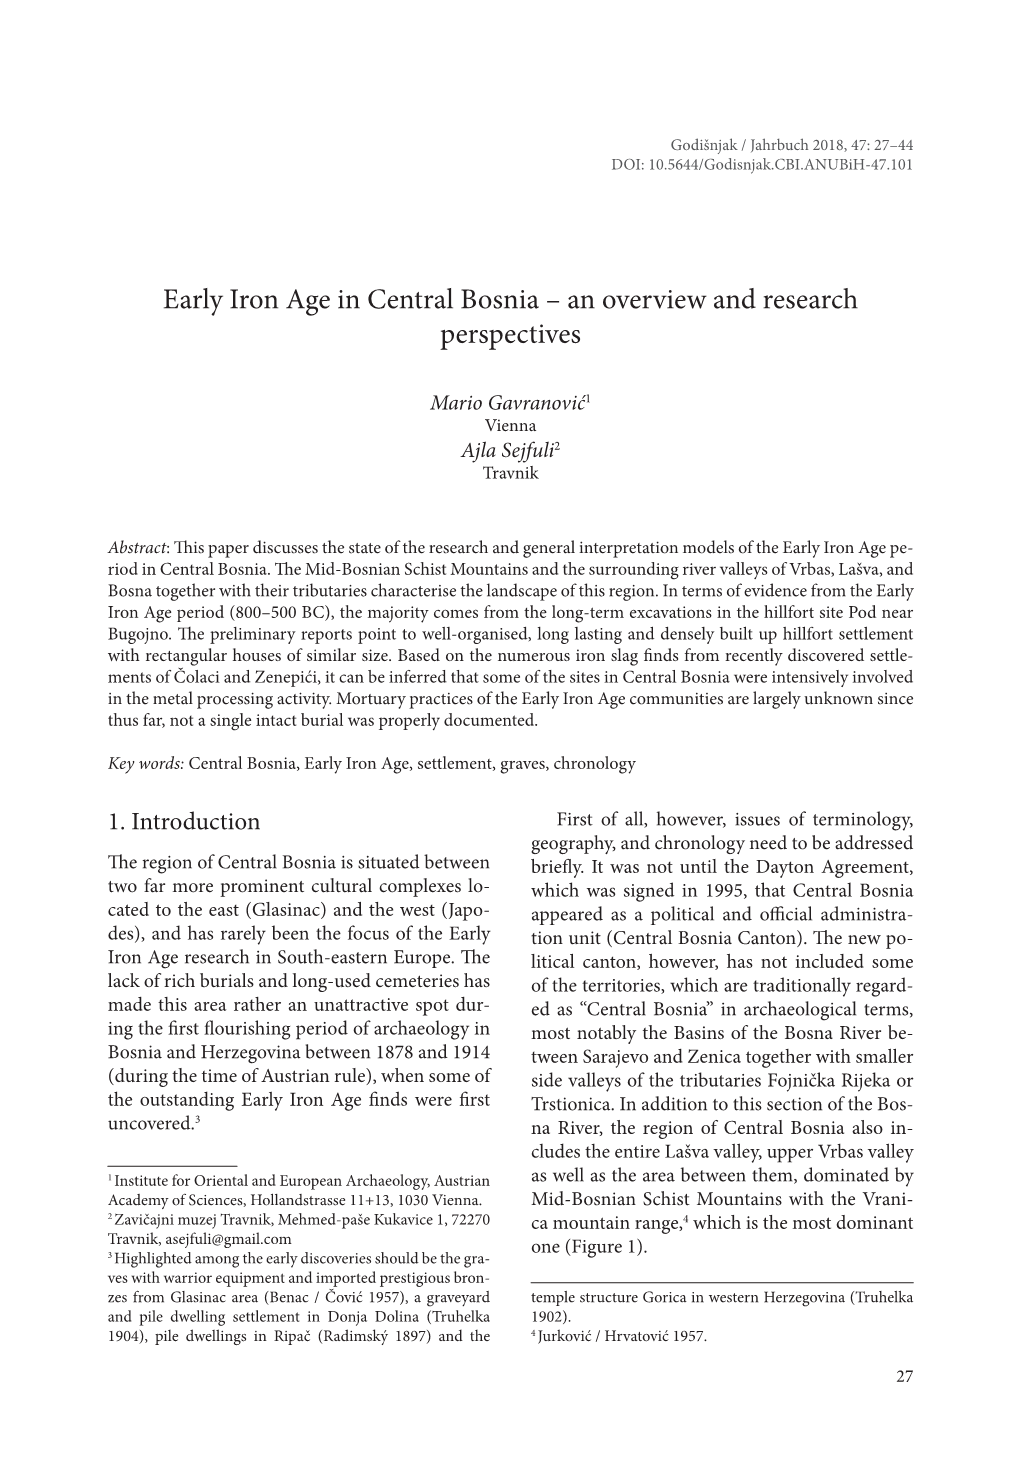 Early Iron Age in Central Bosnia – an Overview and Research Perspectives